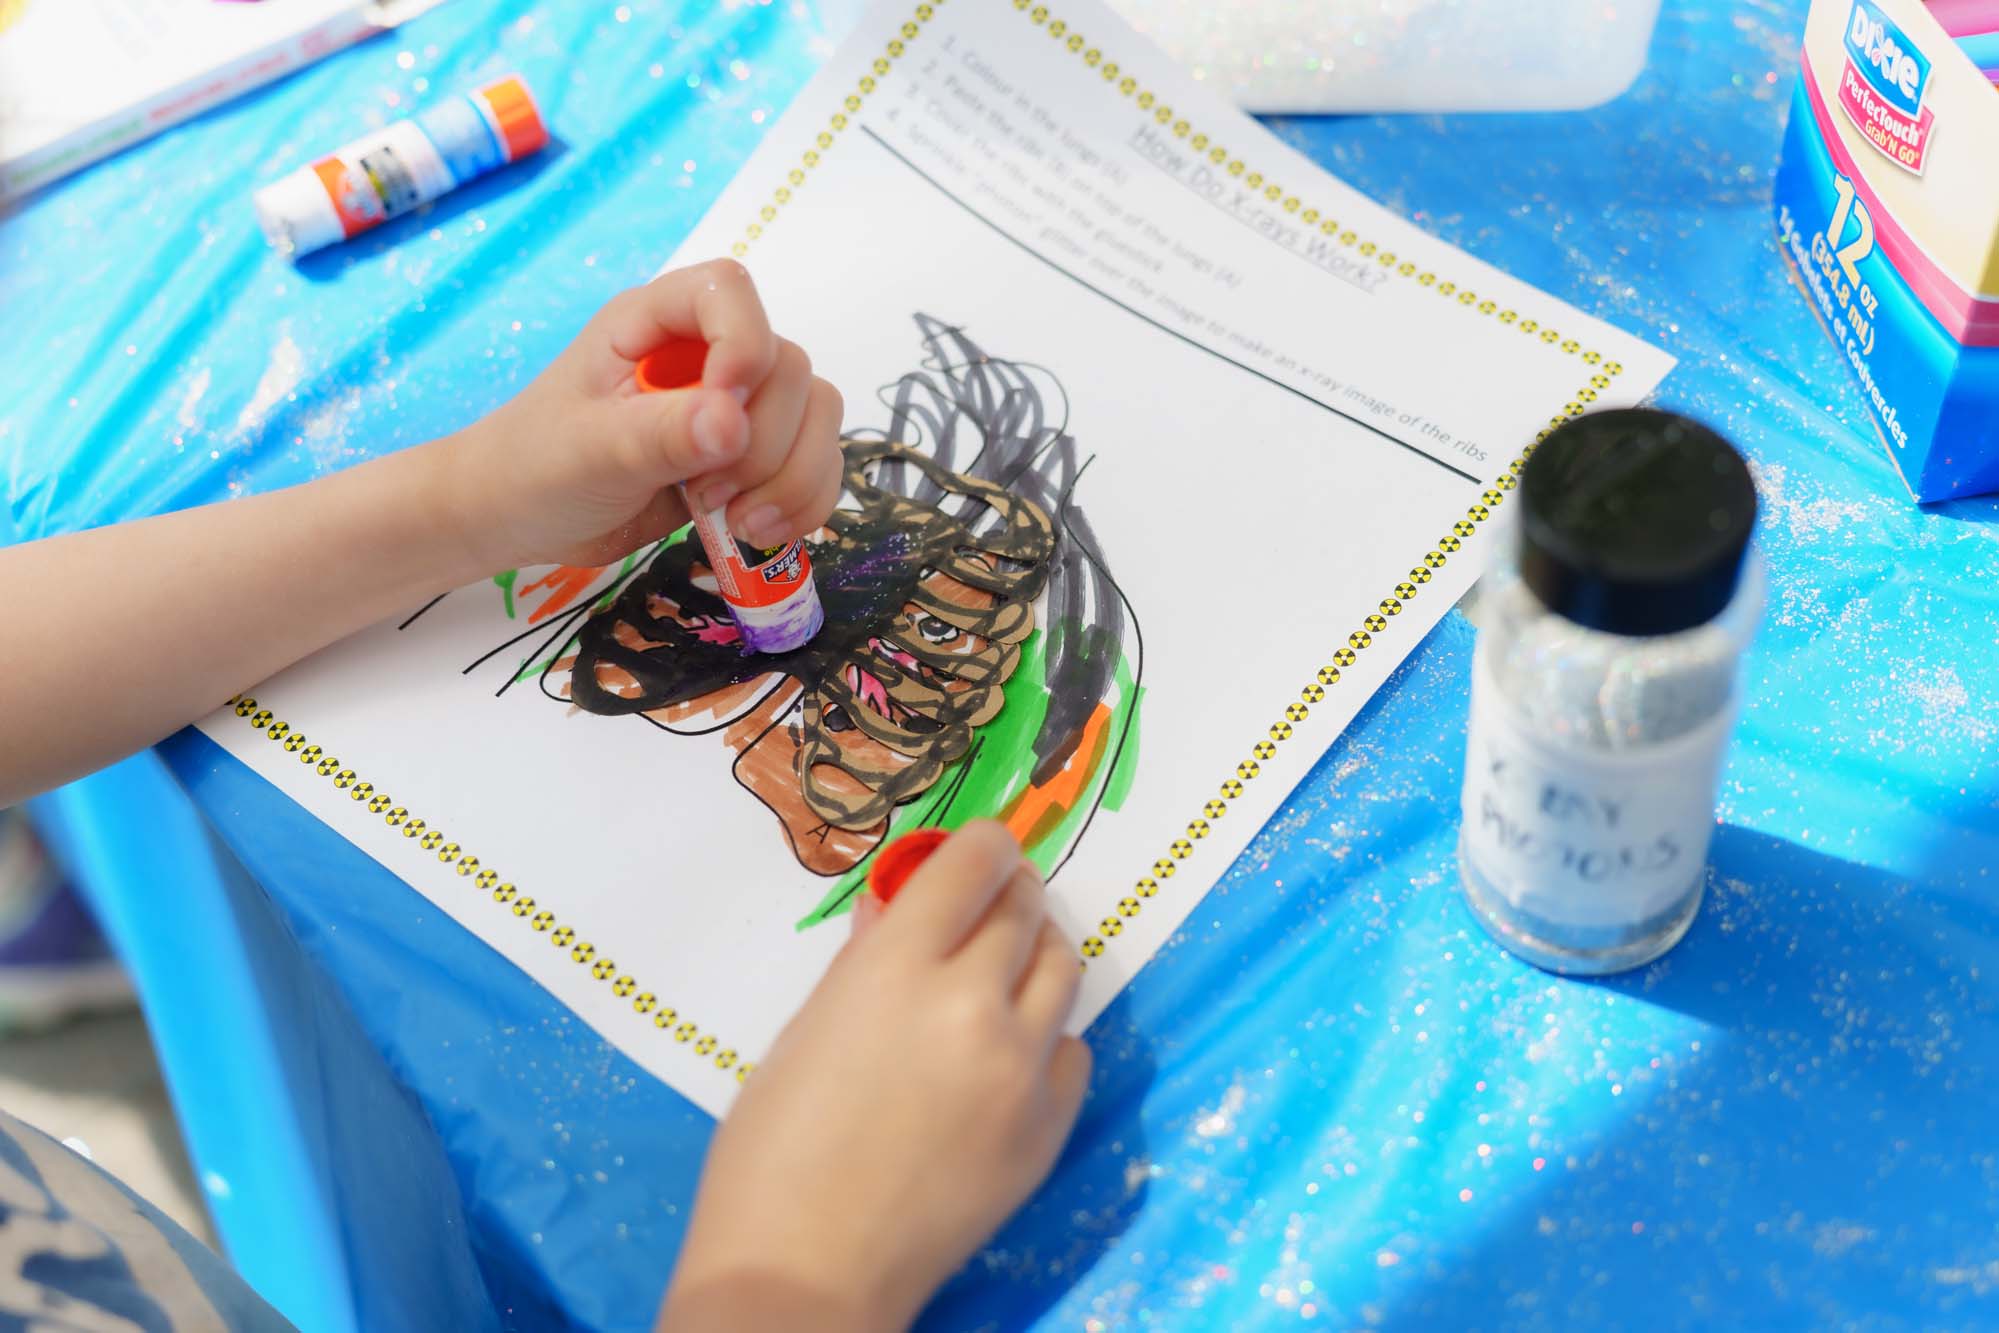 A child applying glue to the lung outlined on an activity worksheet with two glue sticks.